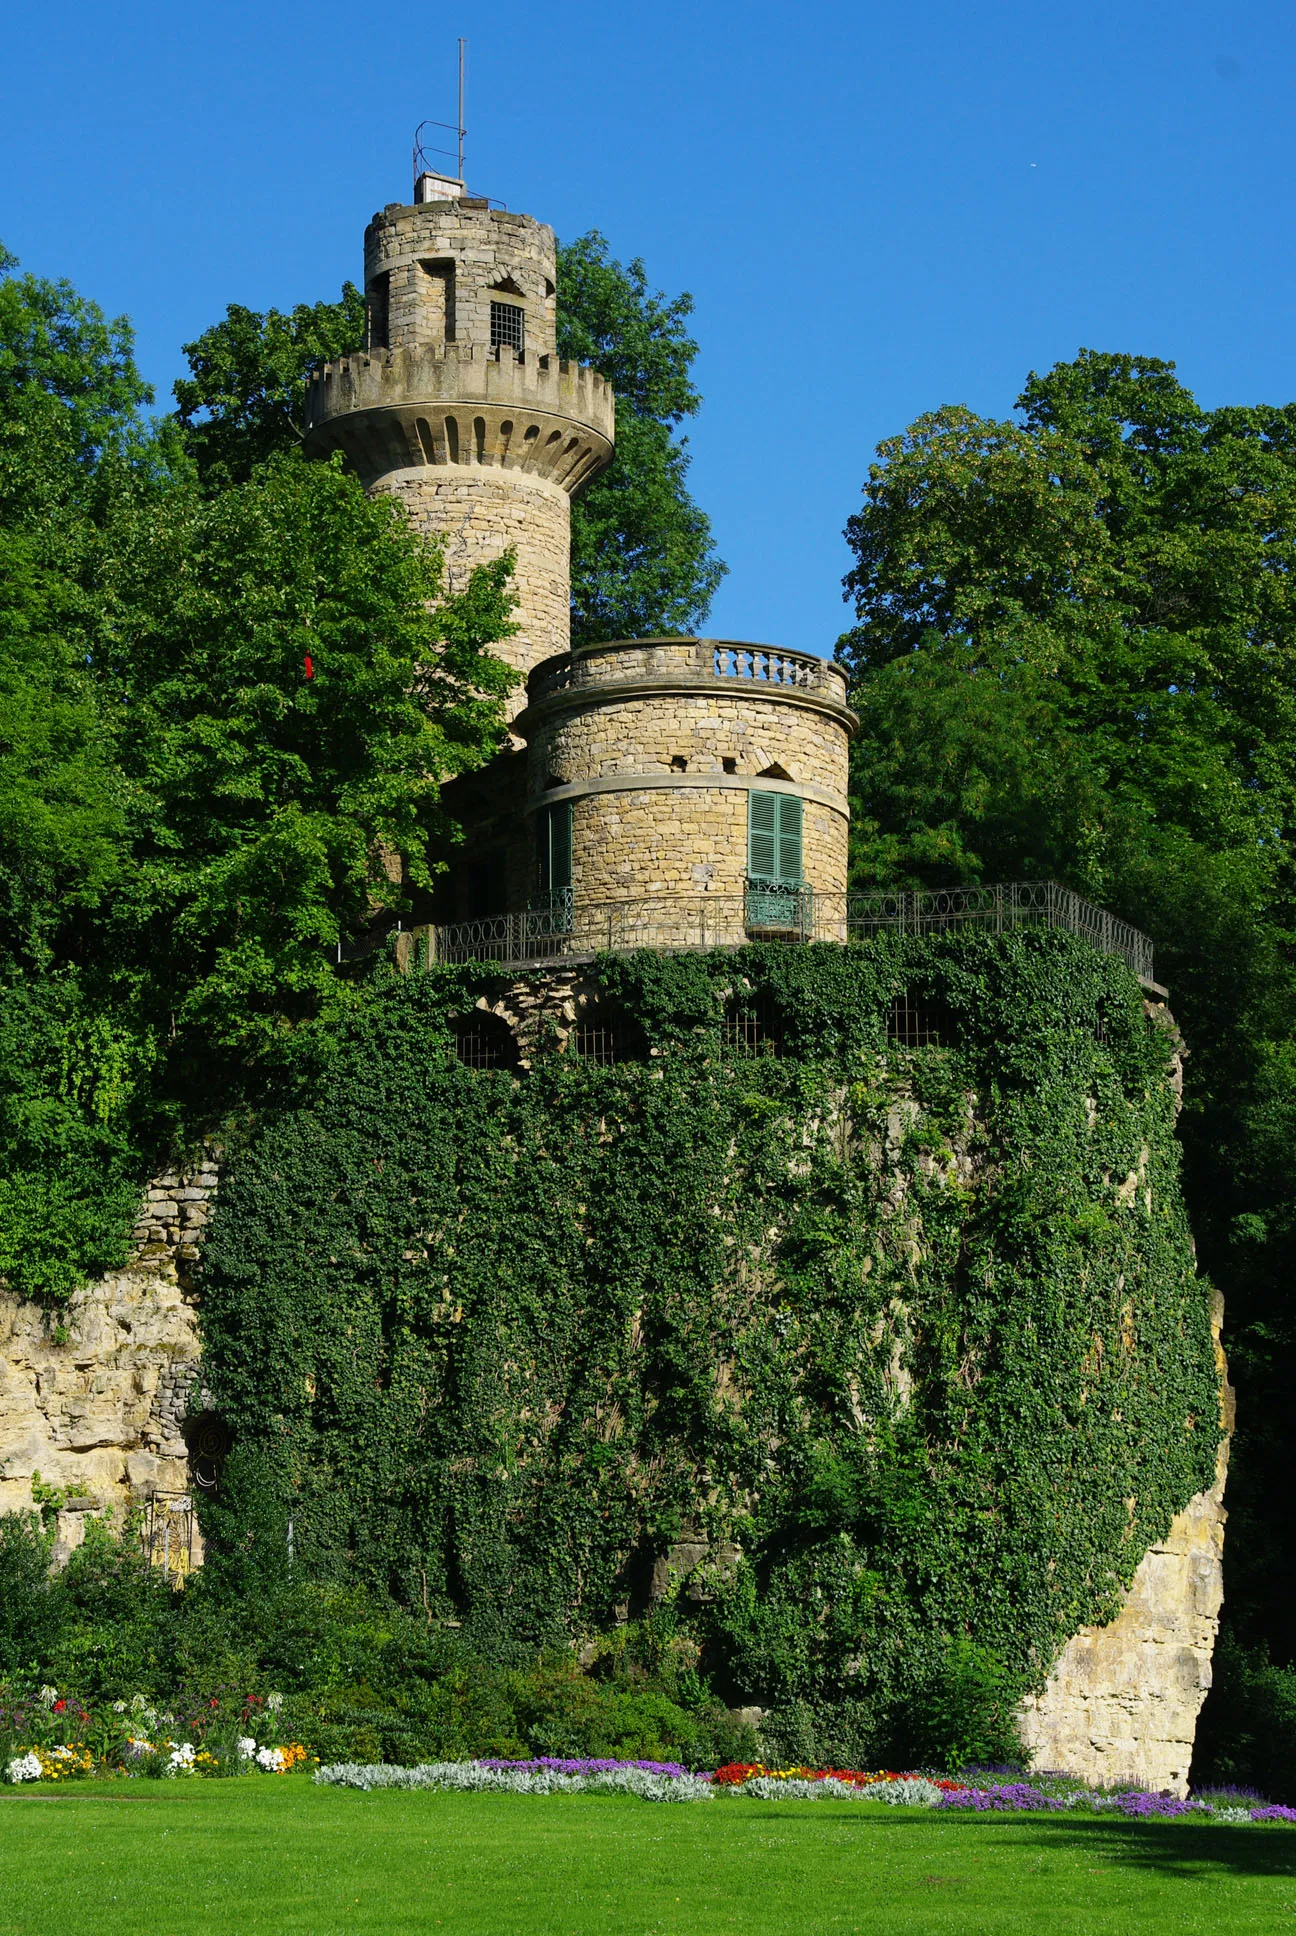 Photo showing: The Emichsburg (castle), seen from the west, in the Märchengarten (fairy tale garden) of the Blühende Barock in Ludwigsburg, Germany.